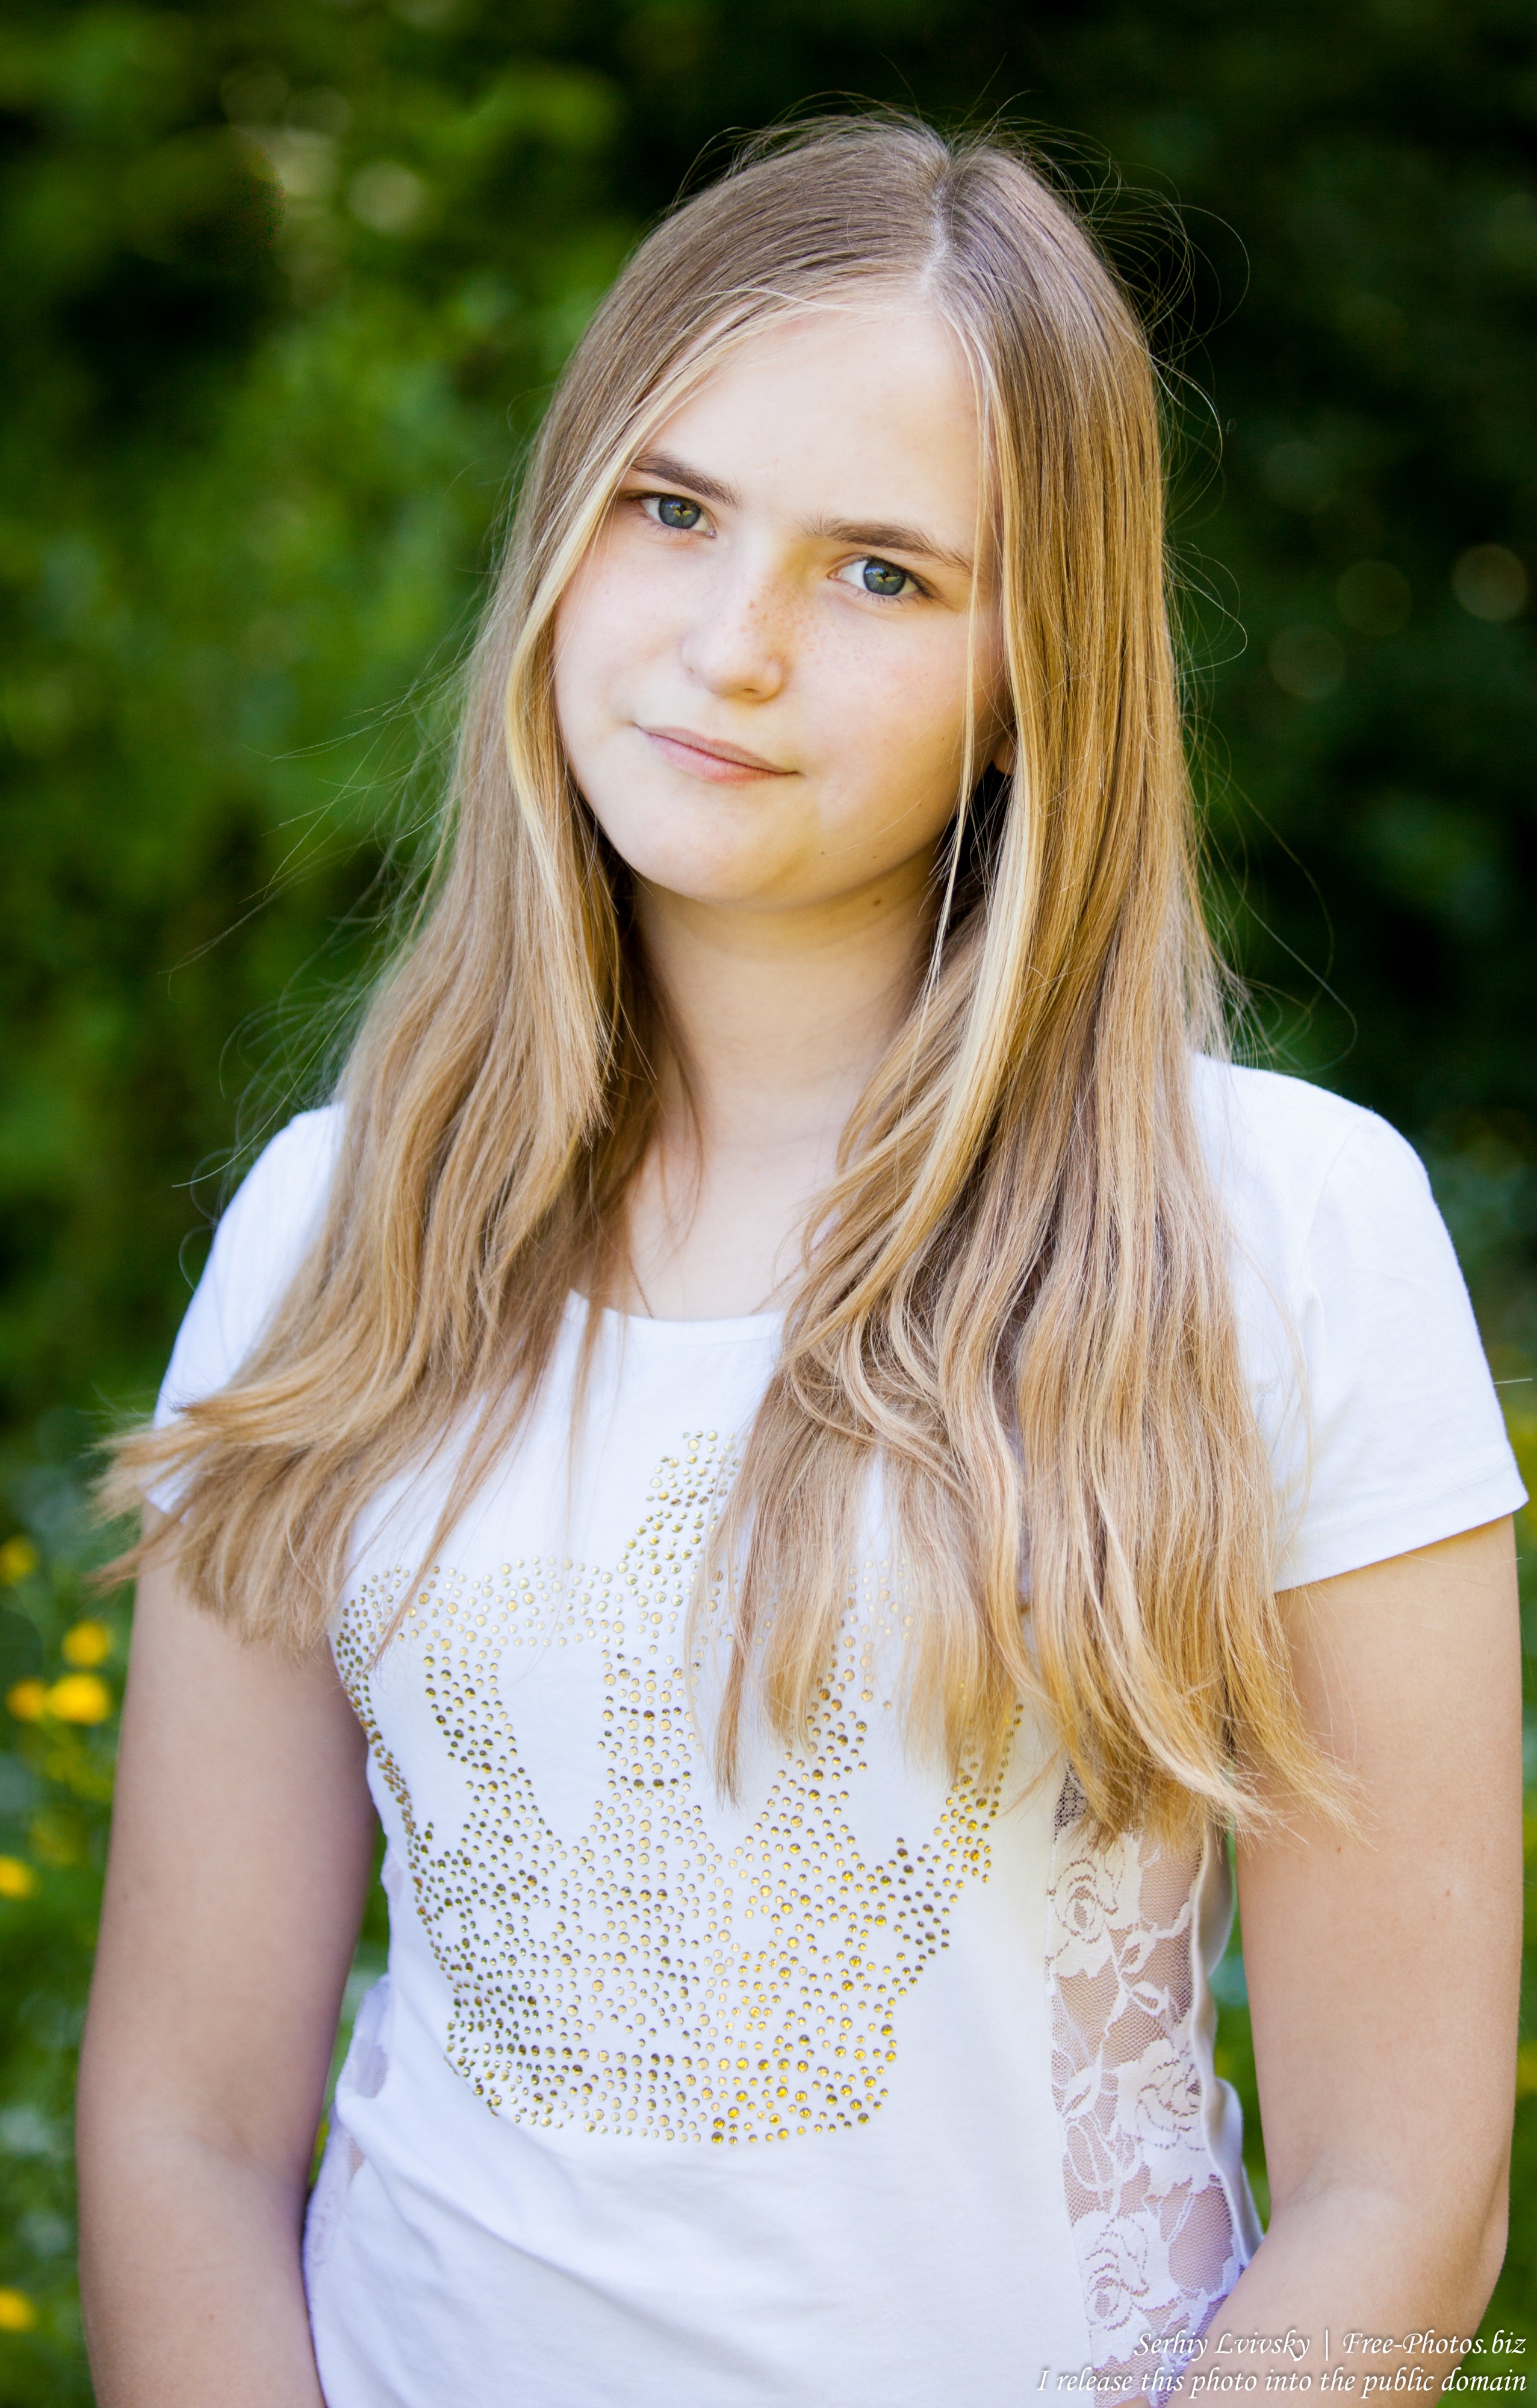 a 14-year old fair-haired girl photographed in June 2015, picture 4